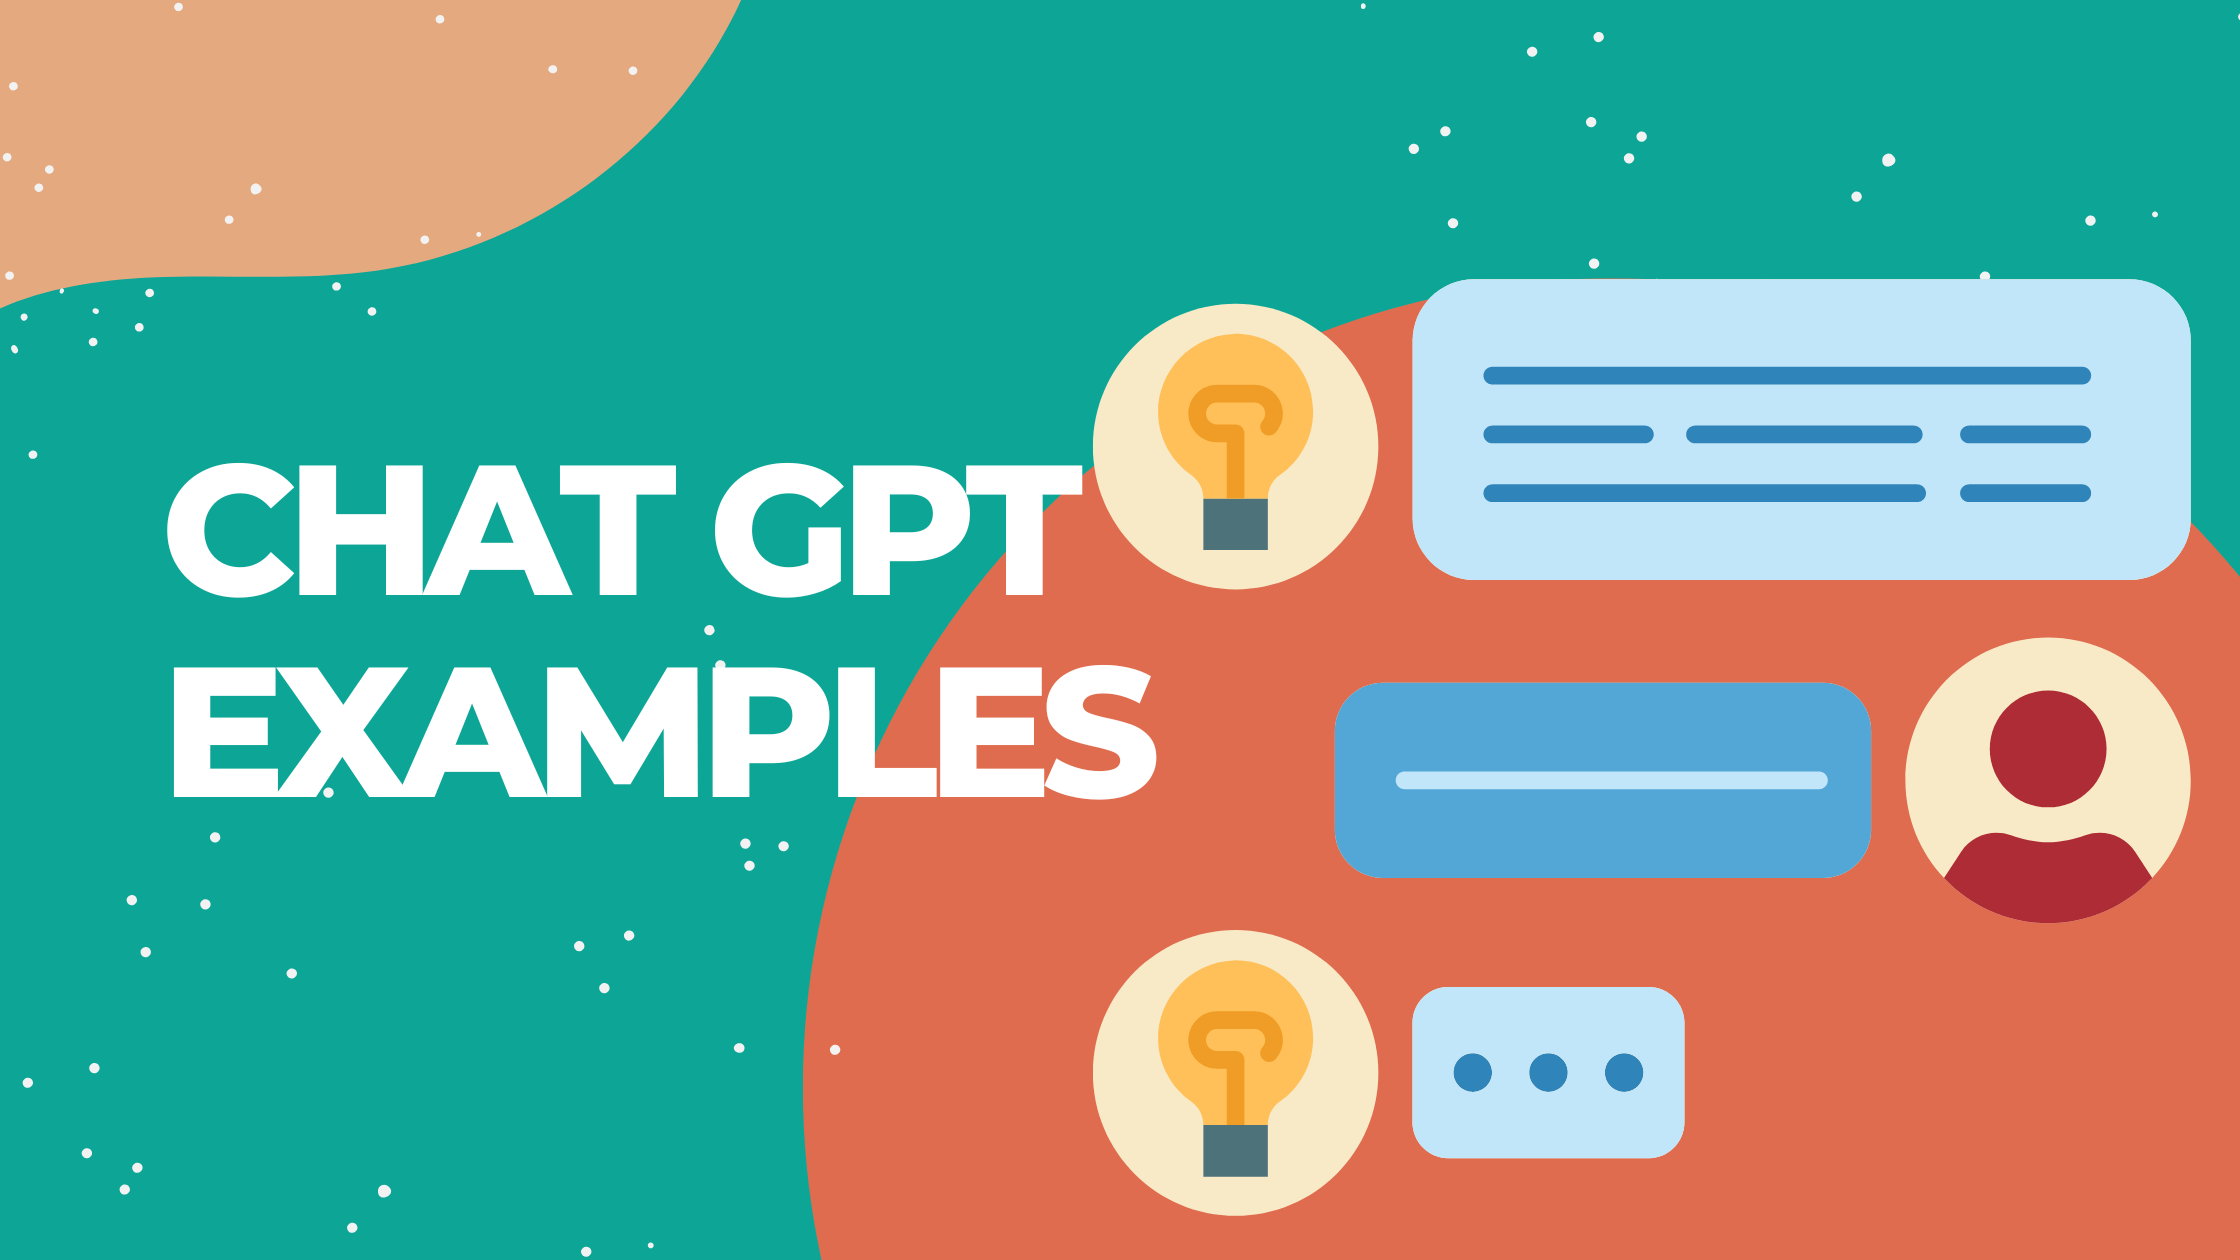 Revolutionize Your Conversations With These Chat GPT Examples